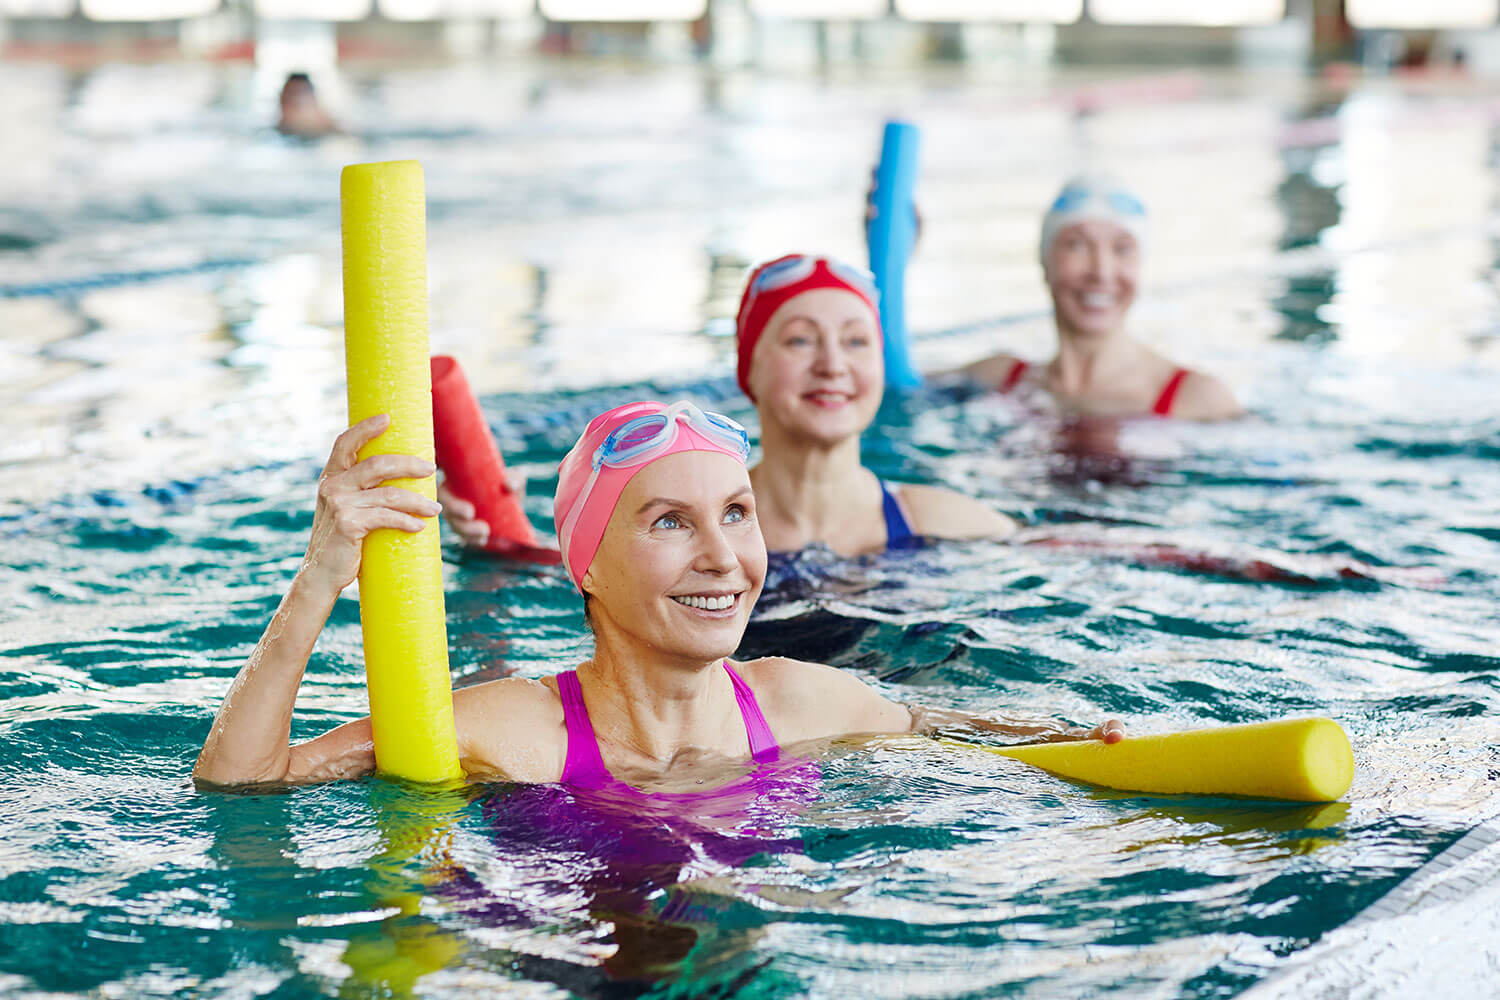 Older adult women in a pool with pool noodles doing water aerobics together